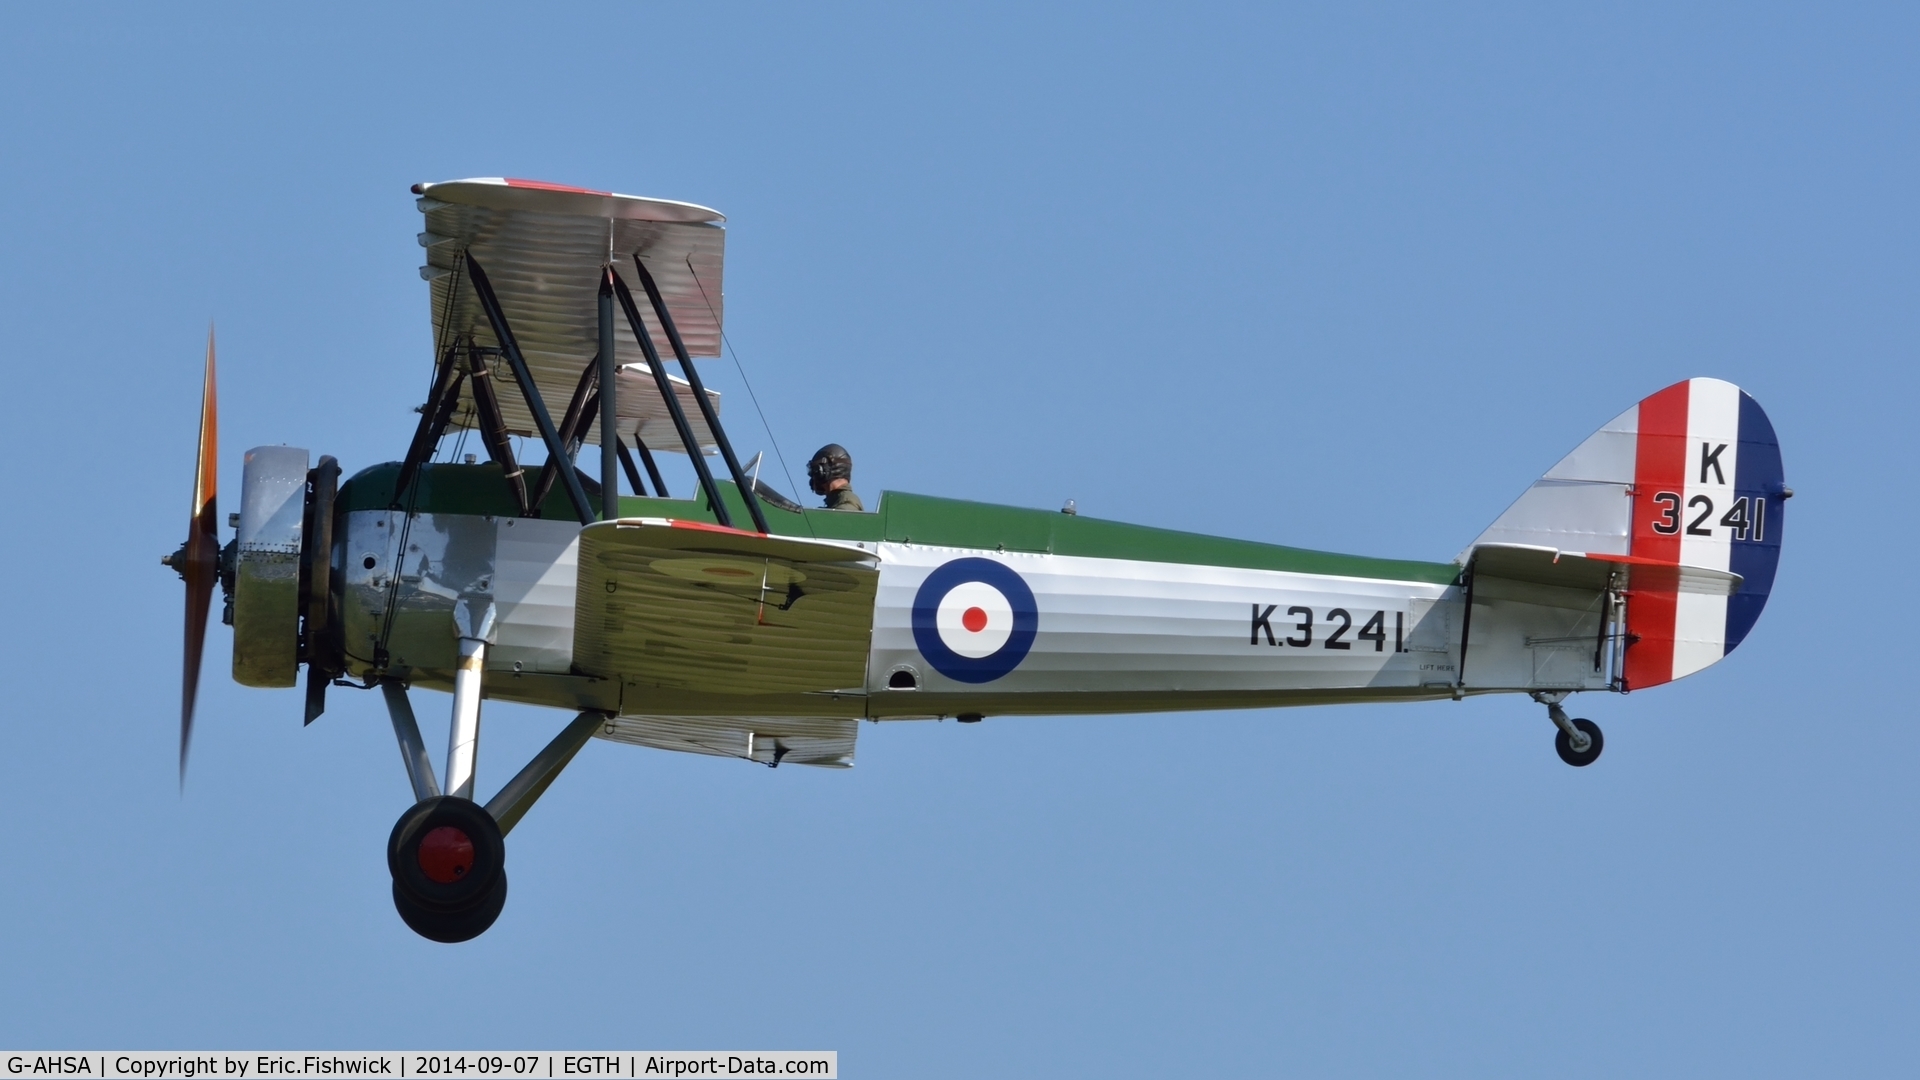 G-AHSA, 1933 Avro 621 Tutor C/N K3215, 44. K3241 in display mode at the glorious Shuttleworth Pagent Airshow, Sep. 2014.